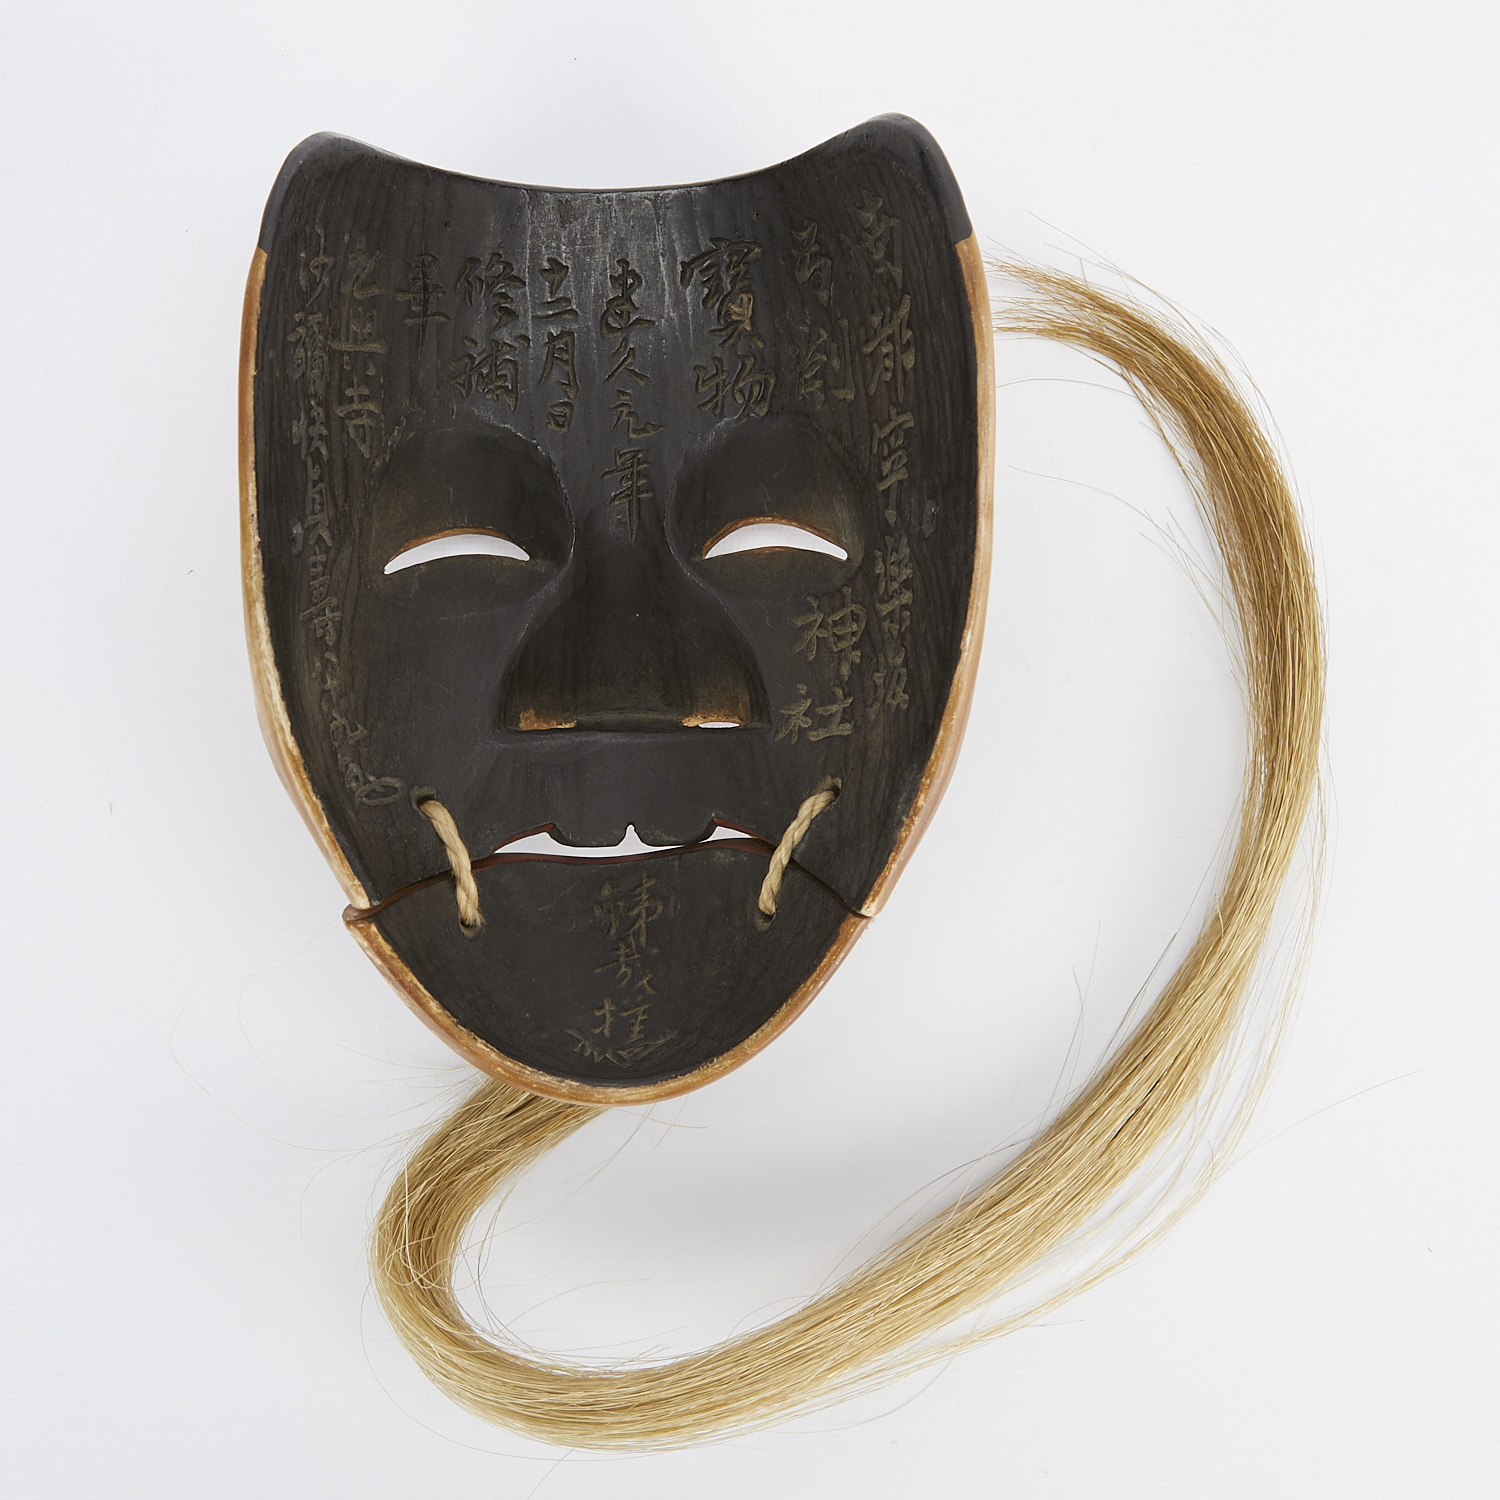 Kano Tessai Carved Wood Noh Mask - Image 9 of 15